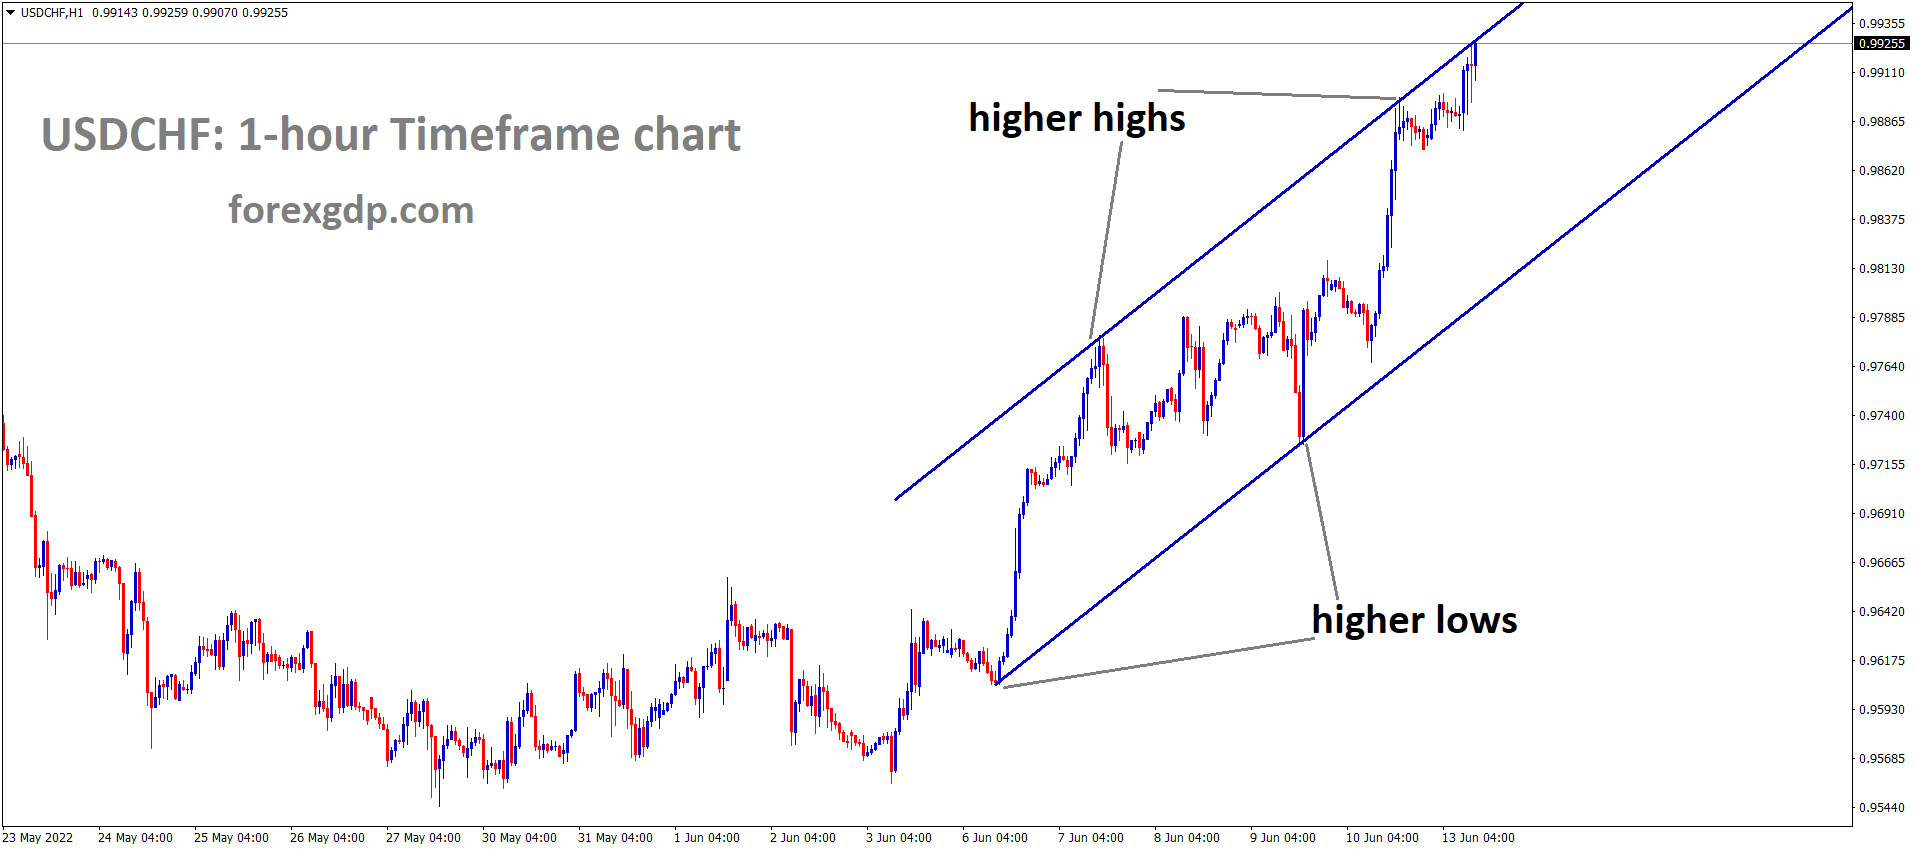 USDCHF is moving in an Ascending channel and the Market has reached the higher high area of the channel